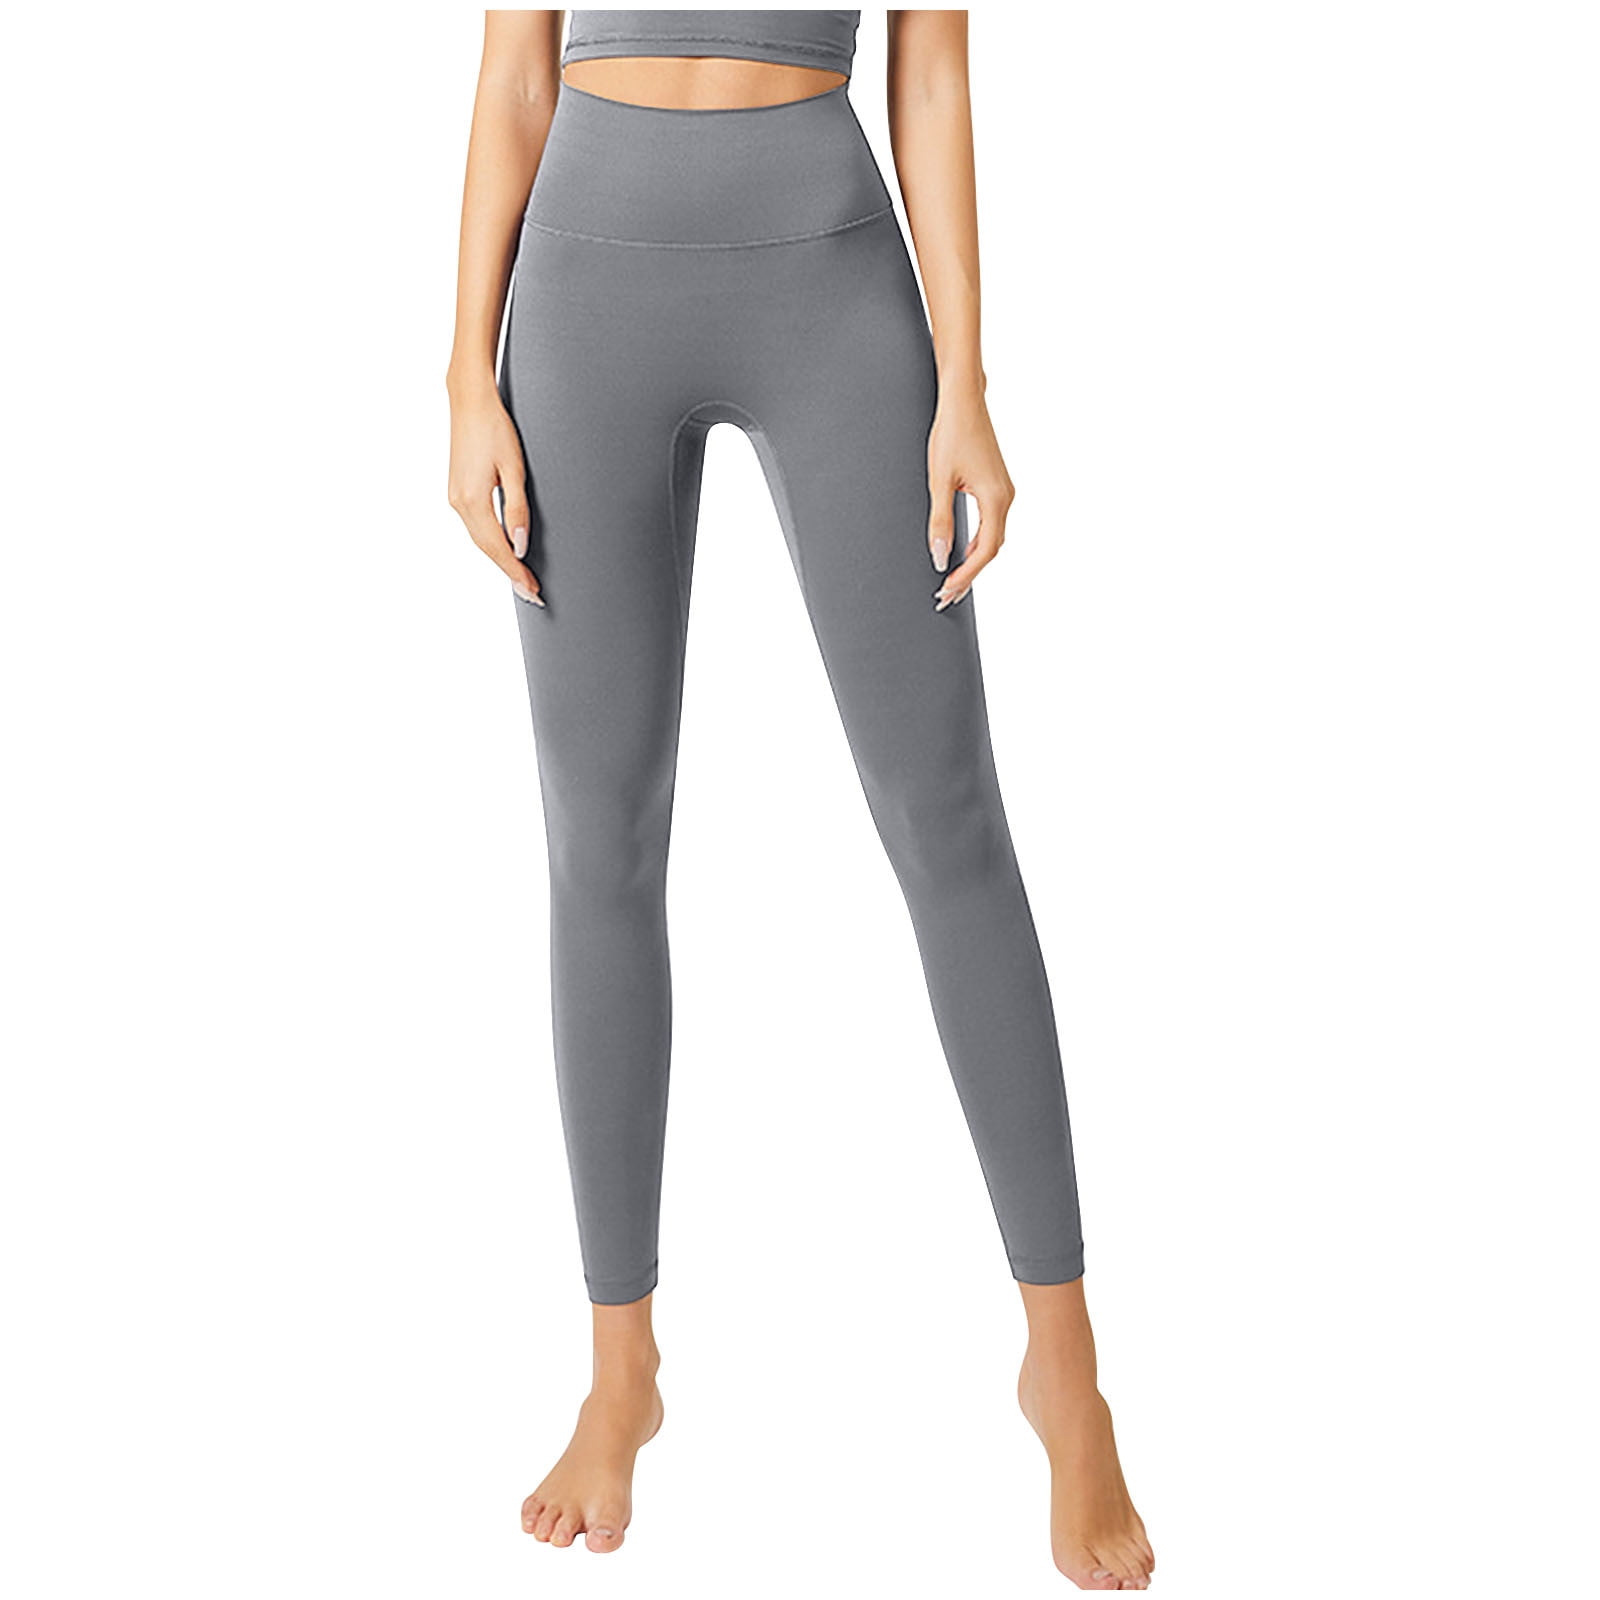 Wyongtao Women's Workout Leggings Buttery Soft High Waisted Yoga Pants Butt  Liftings Athletic Legging,Gray XL